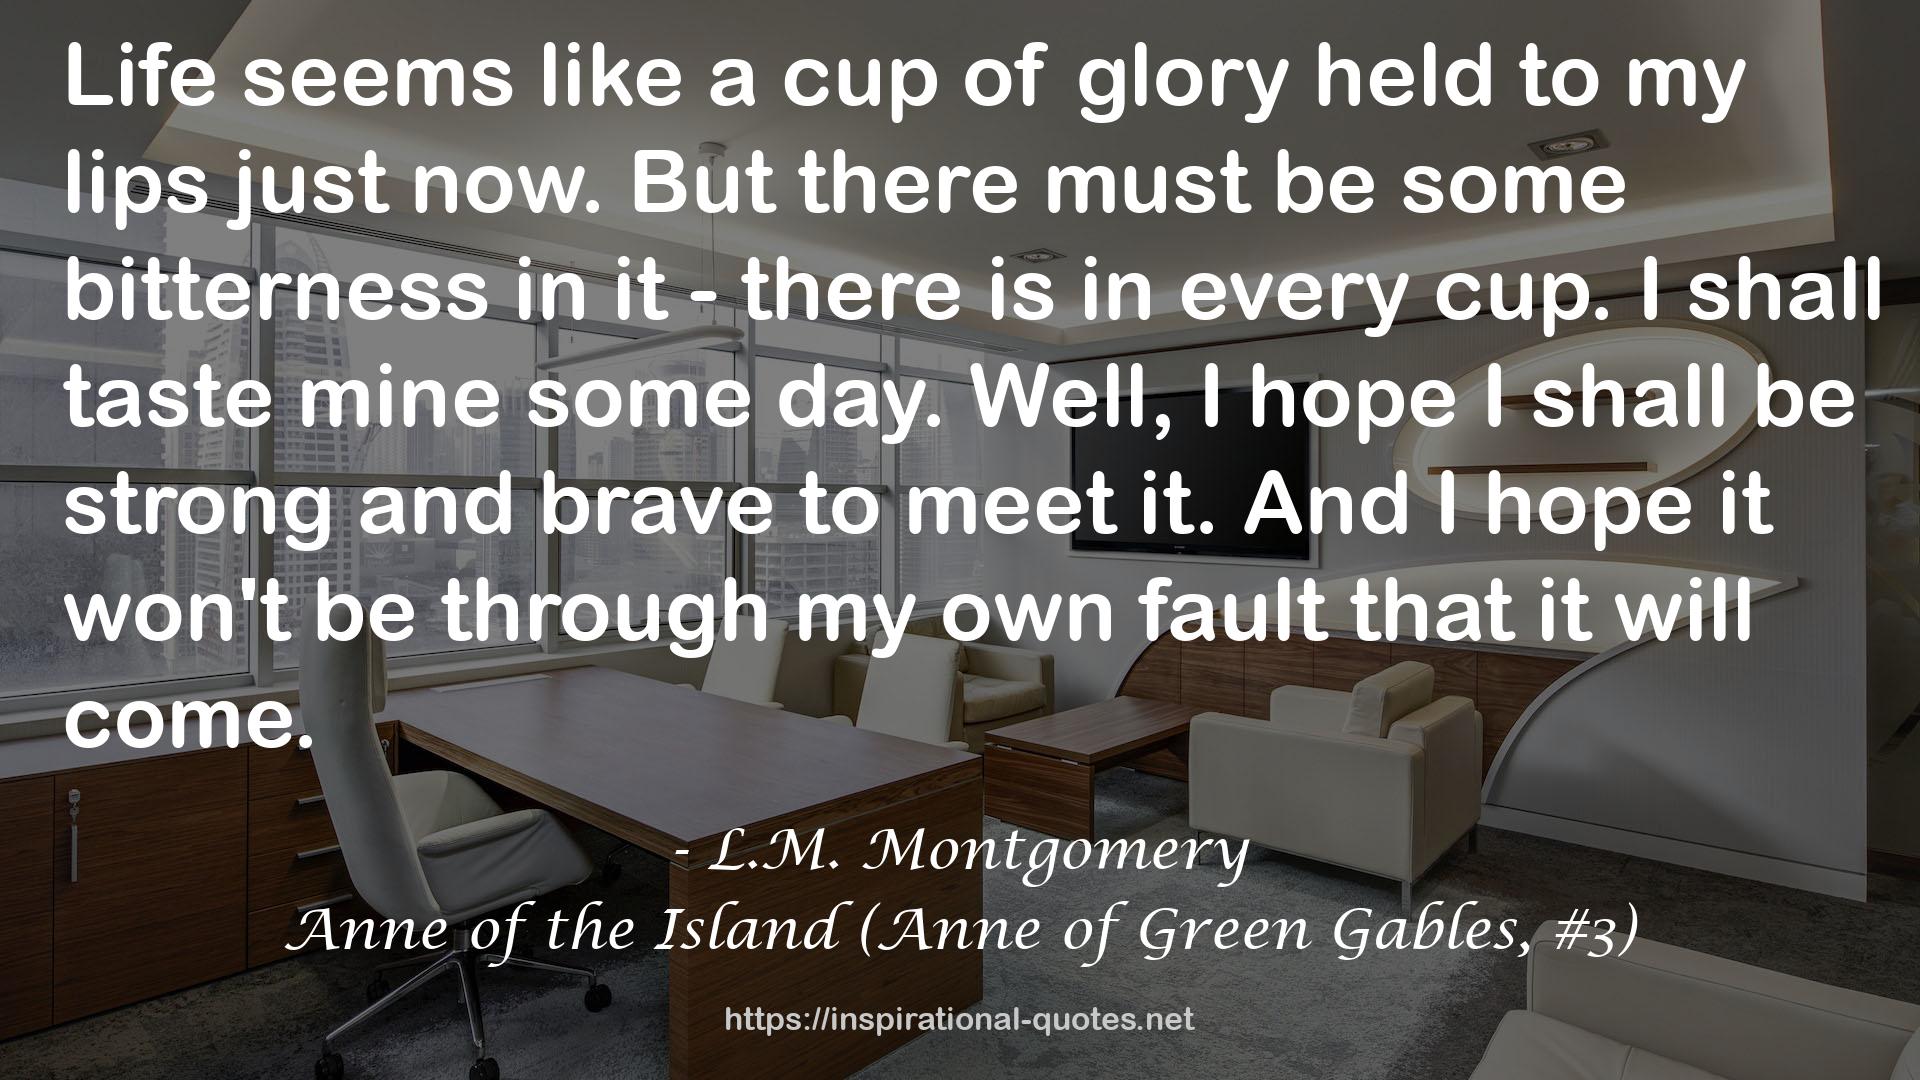 Anne of the Island (Anne of Green Gables, #3) QUOTES